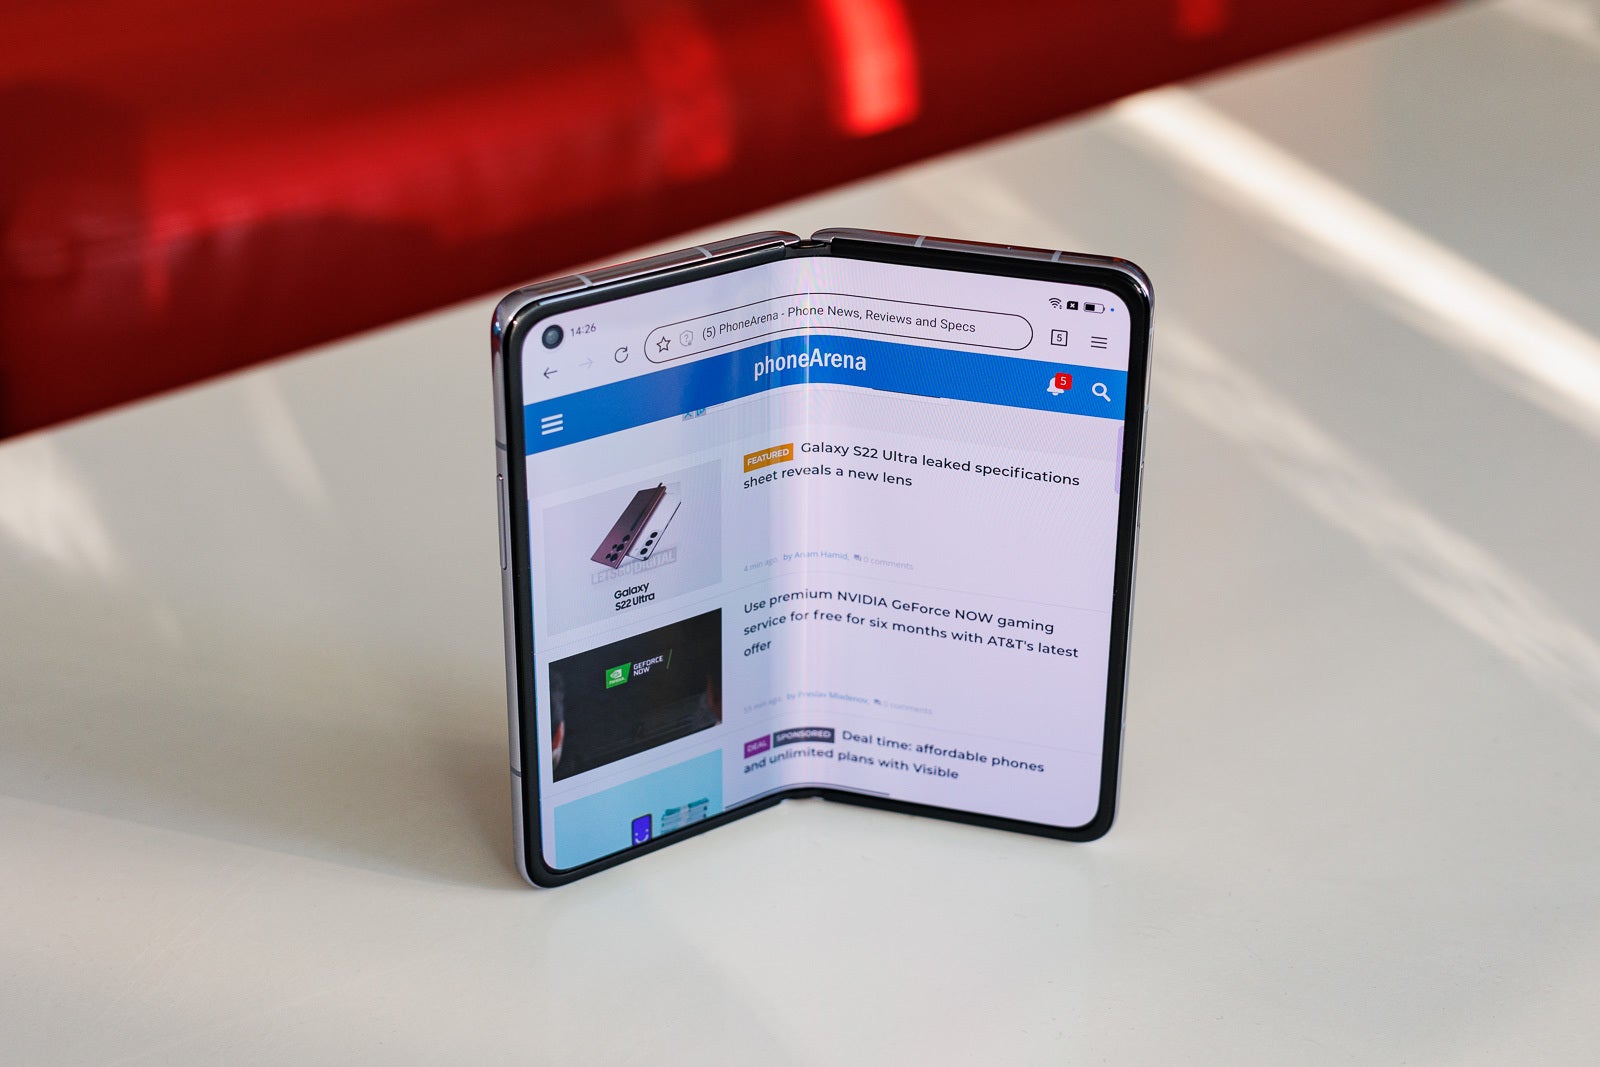 That's the Oppo, but what if Apple released this type of device? - Can a foldable replace both my phone and tablet?